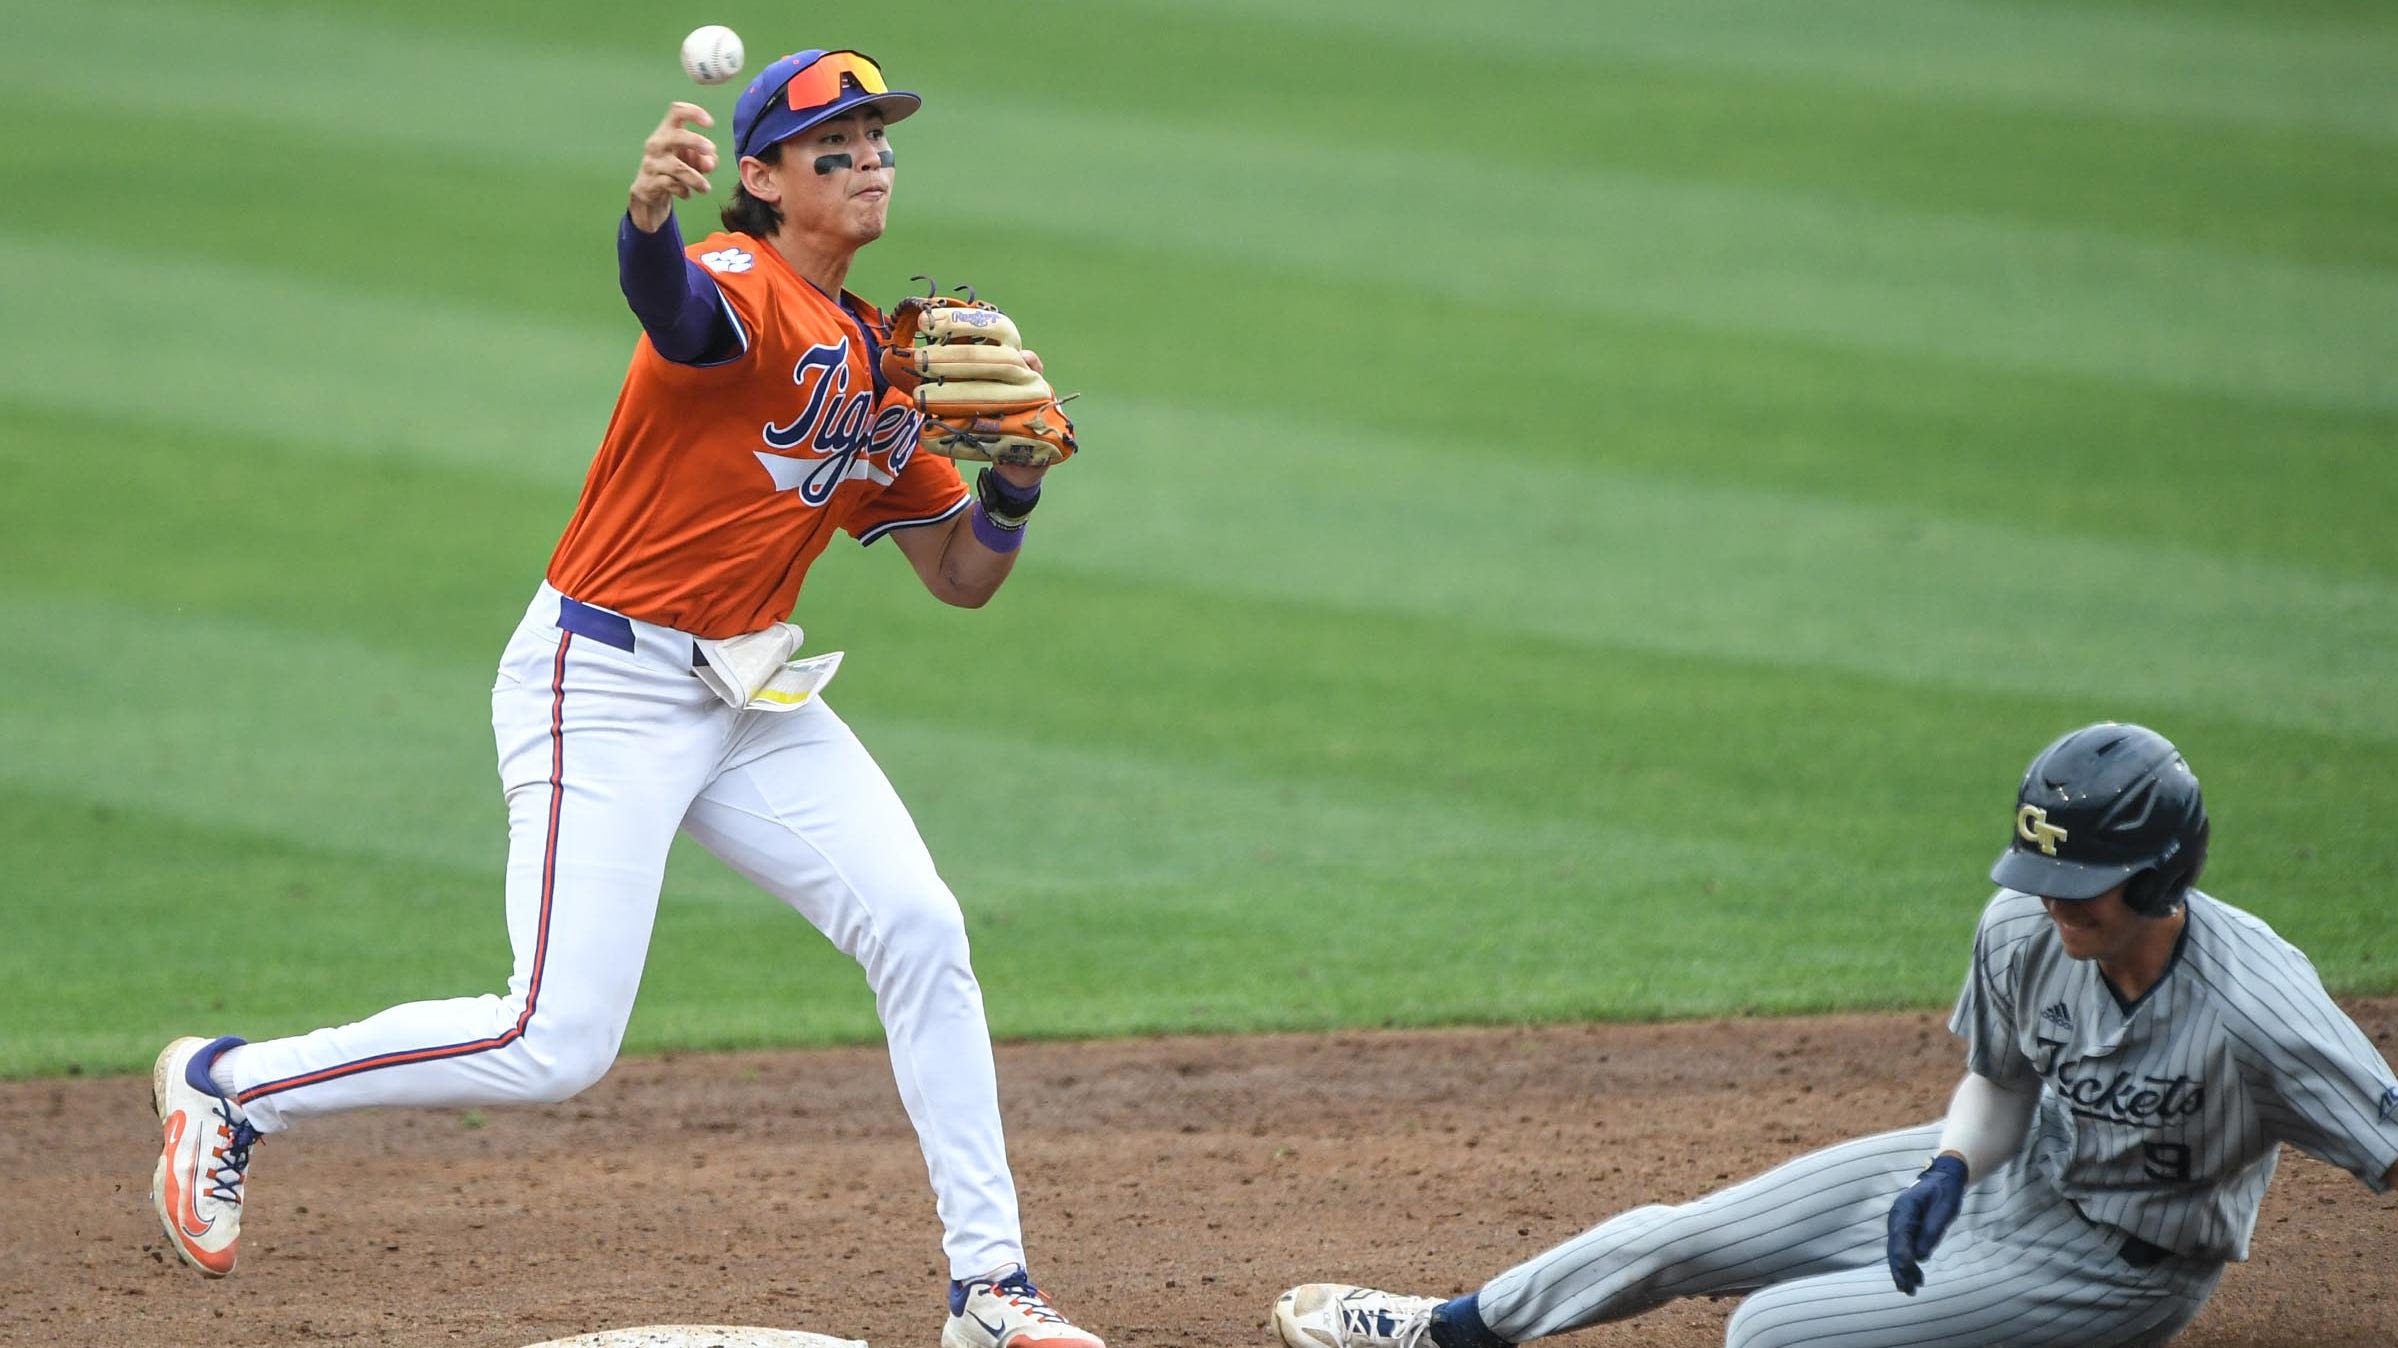 Clemson baseball blocked from ACC tournament semifinals with loss to Miami